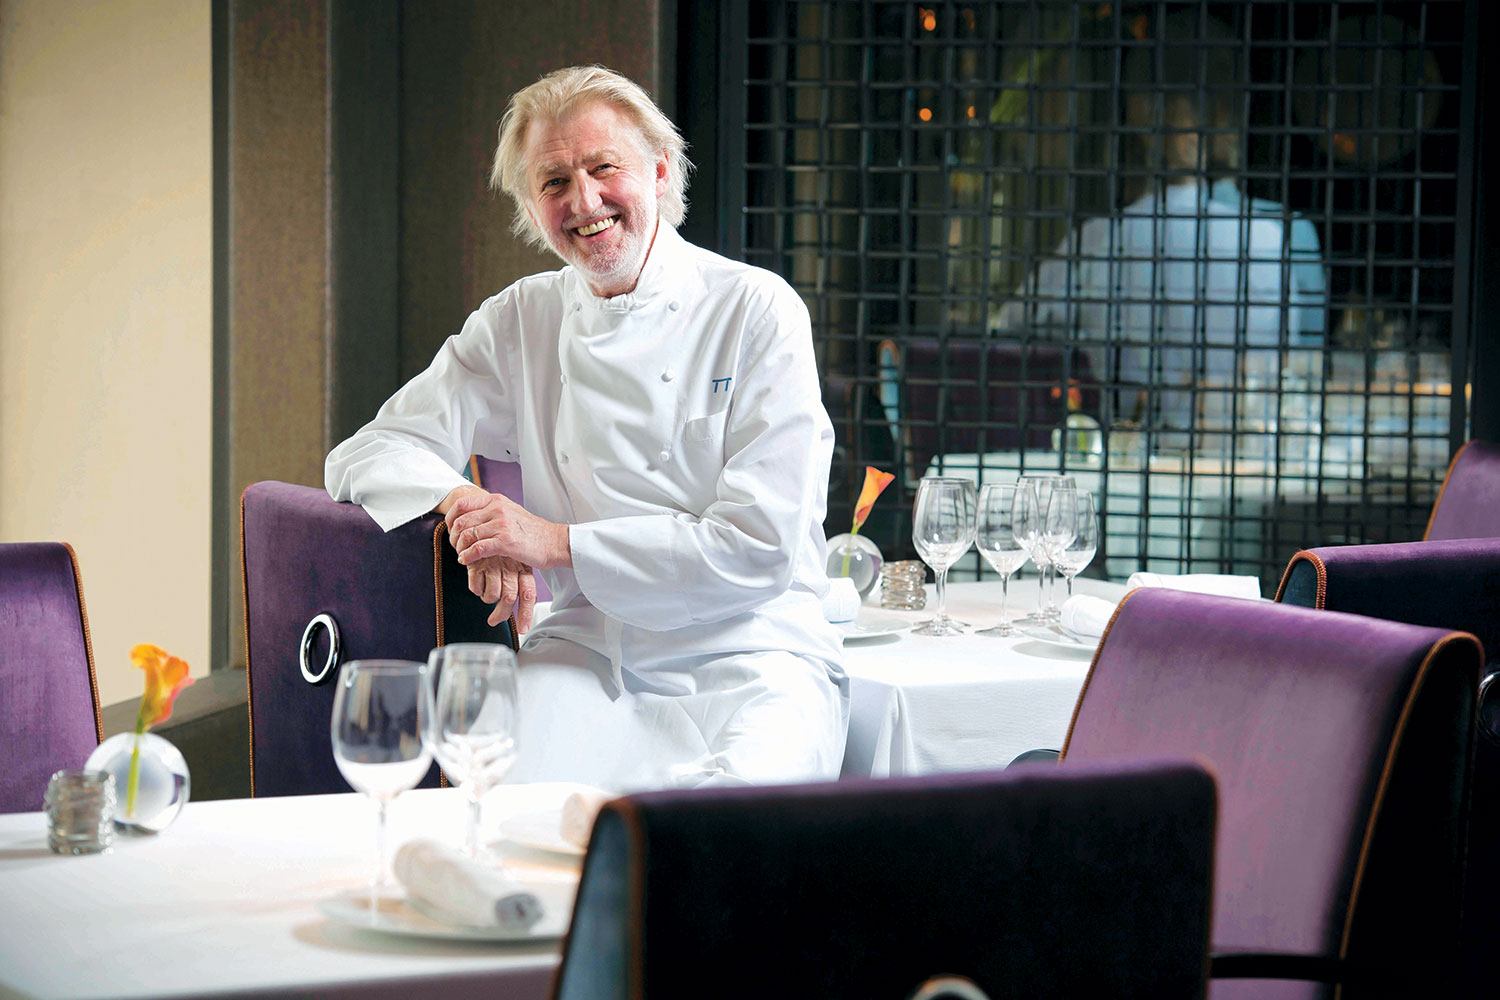 Pierre Gagnaire at one of his 13 restaurants around the world